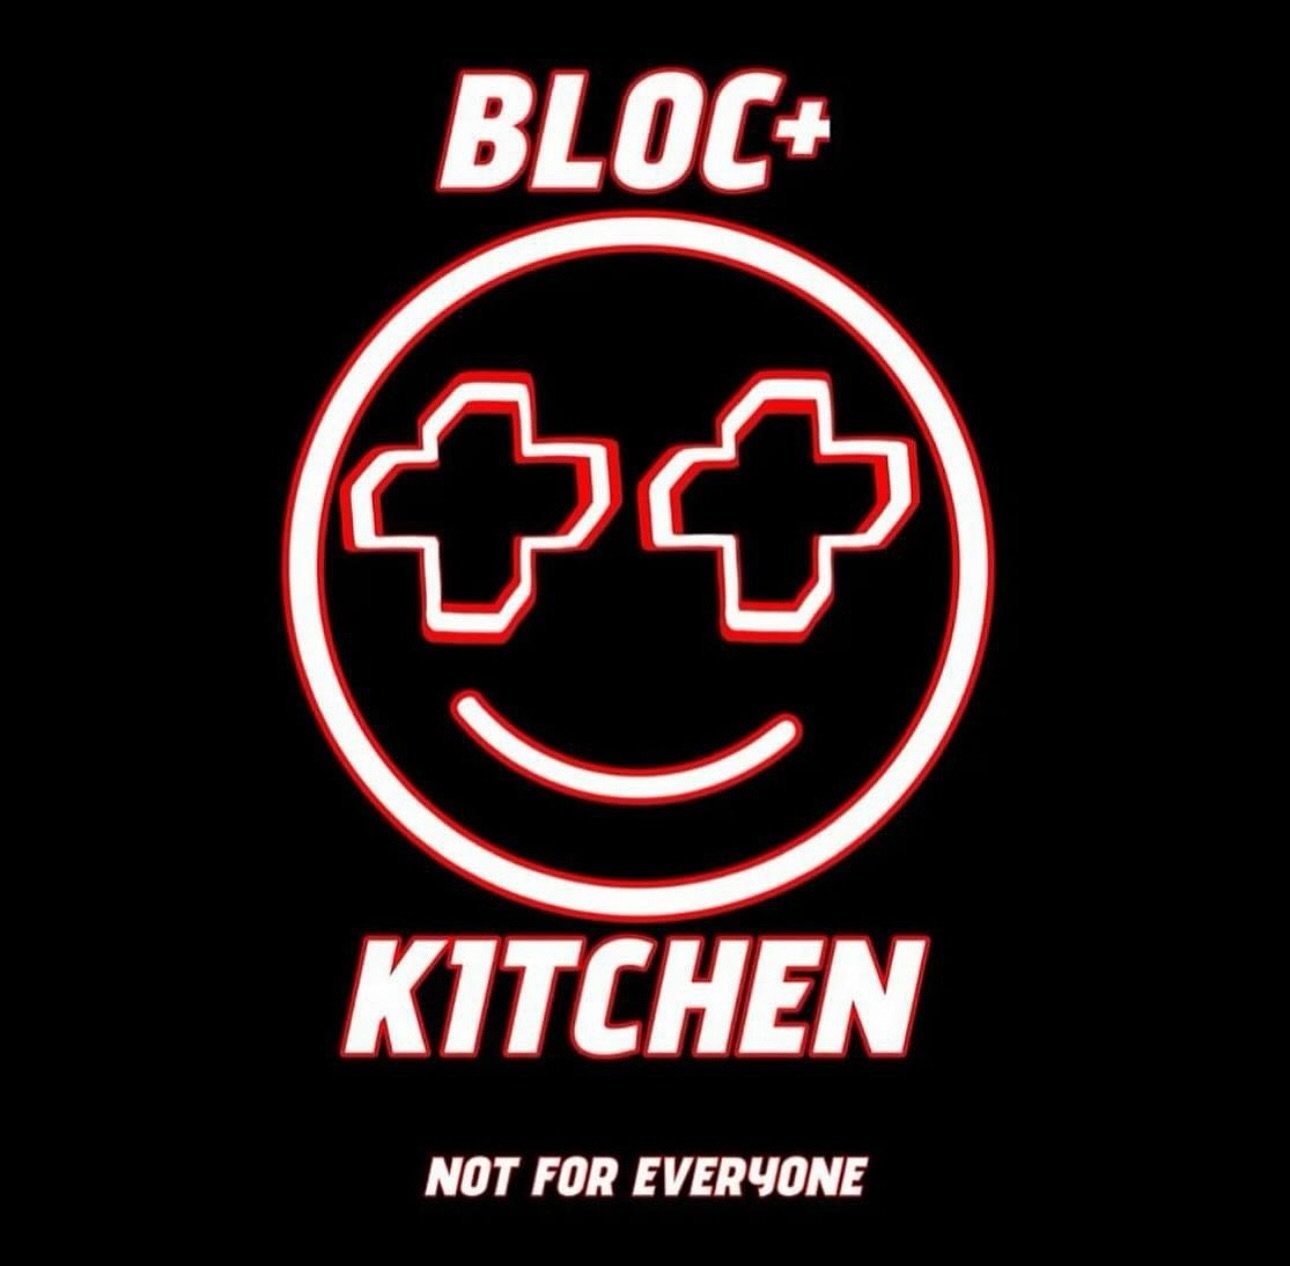 ❤️&zwj;🔥 WE&rsquo;RE HIRING! ❤️&zwj;🔥 Chefs of all grades

💸 &pound;13-15 per hour depending on experience (with references) 
👨&zwj;🍳 Media opportunities
⚡️ Creative ideas and expression valued
🤑 Excellent tipping structure shared equally with 